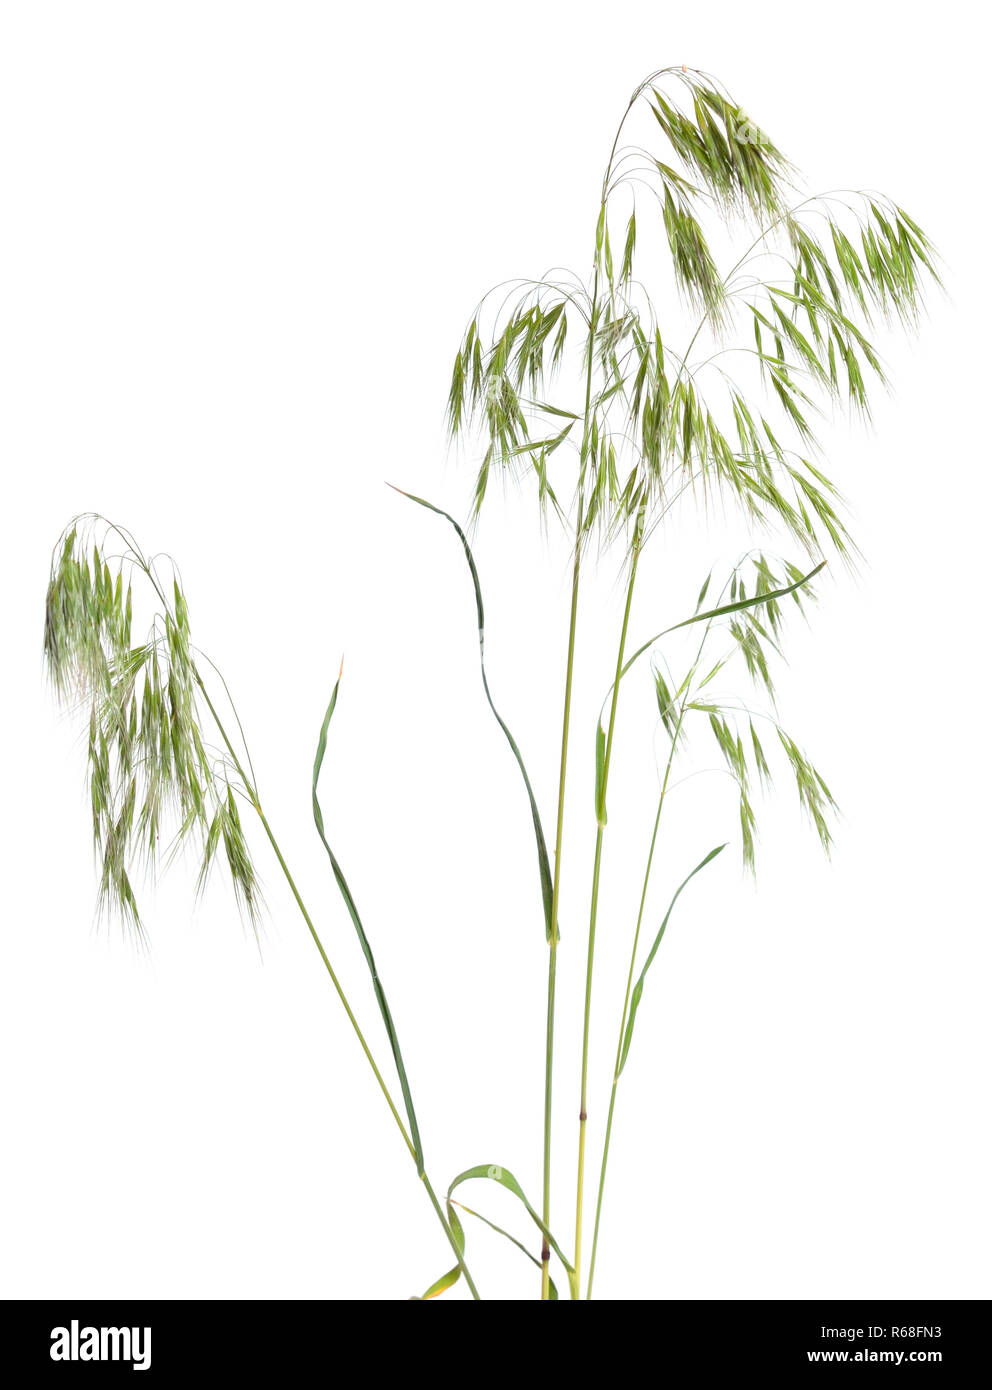 Bromus tectorum, known as drooping brome or cheatgrass. Isolated Stock Photo